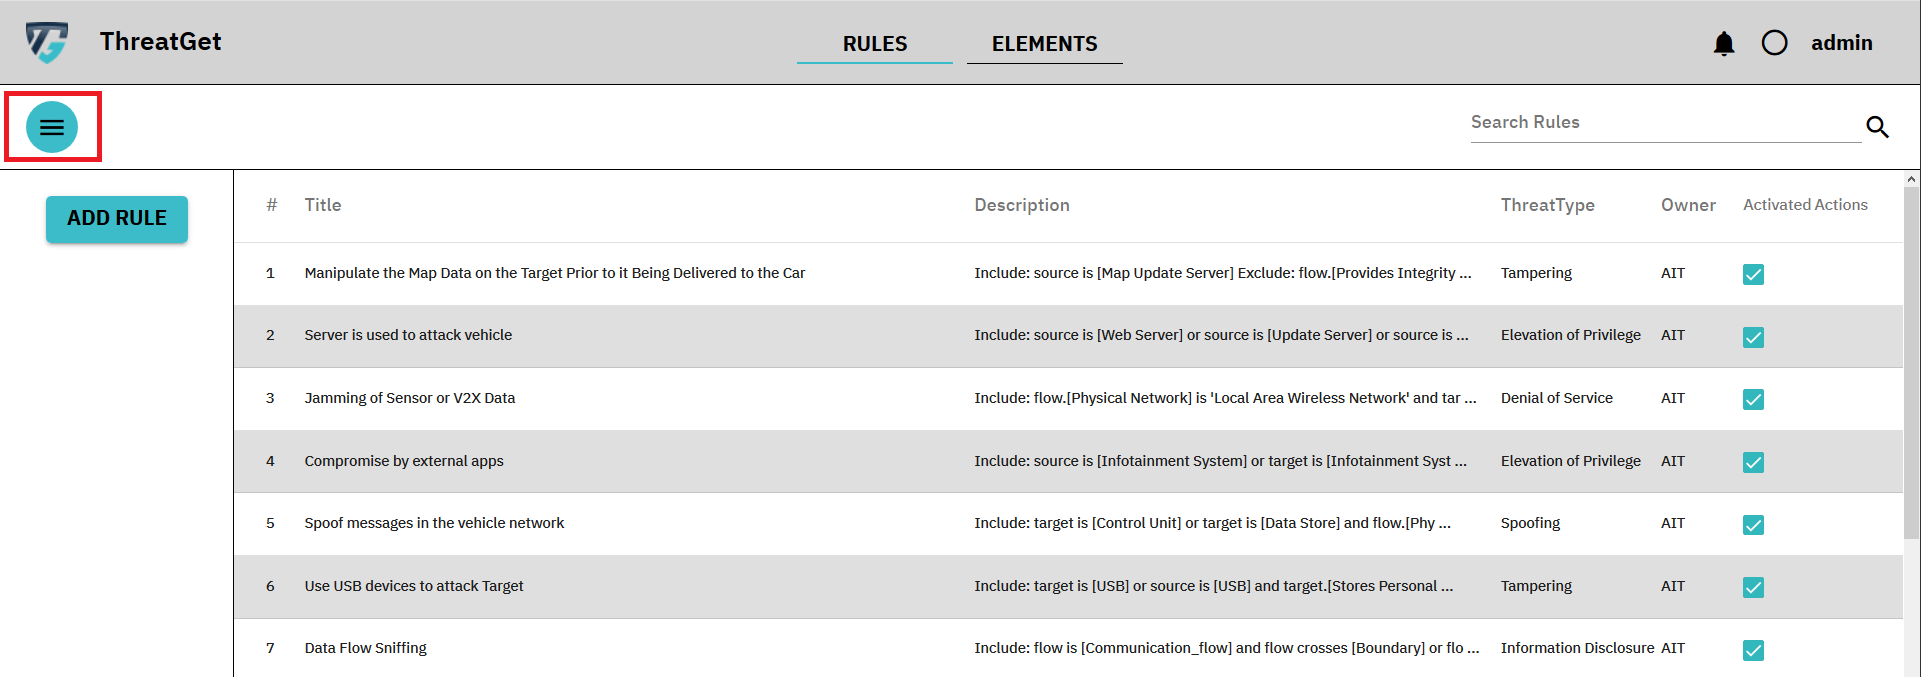 Rules overview screen menu toggle button marked